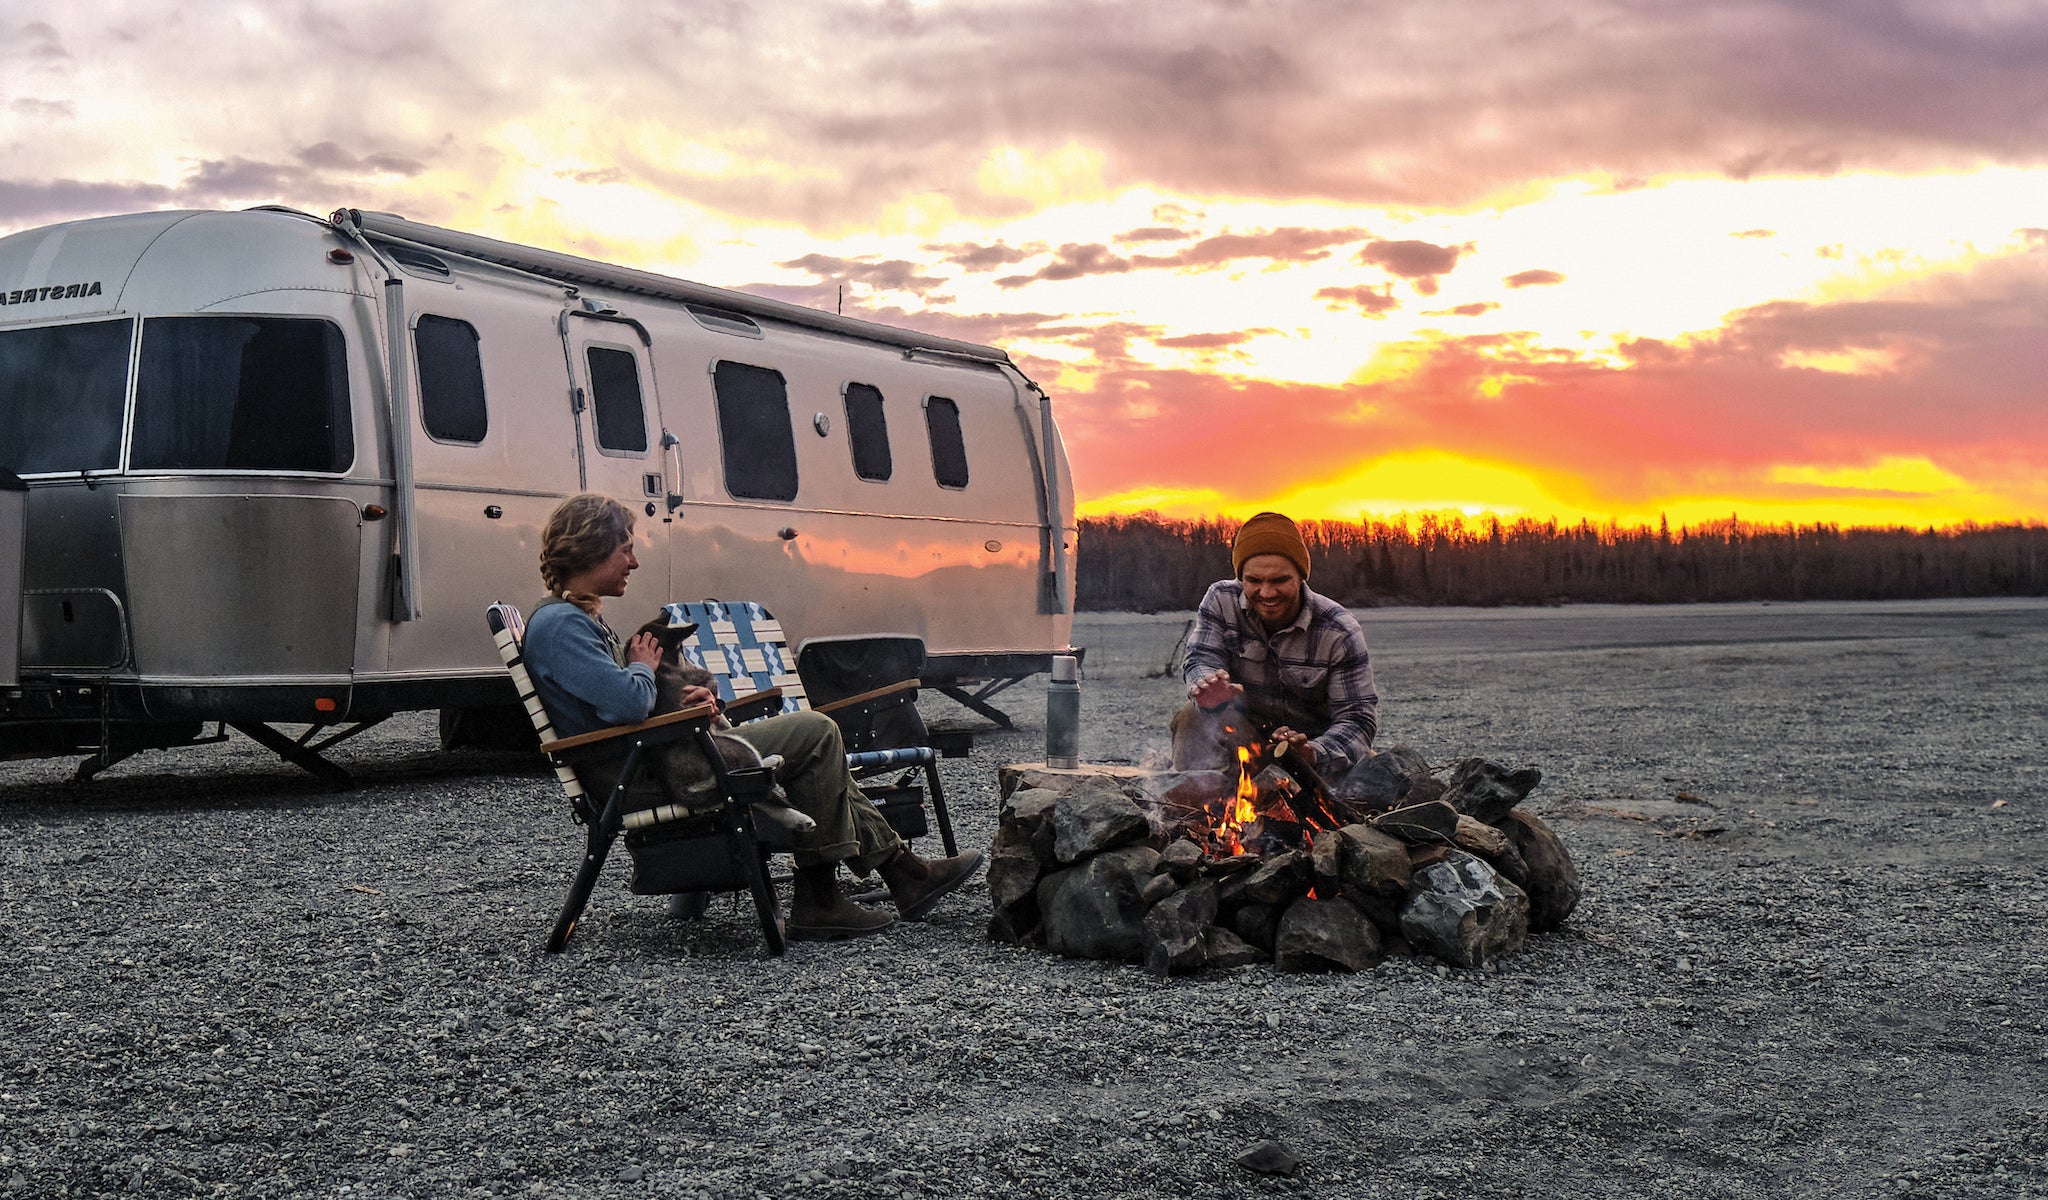 A couple sitting around the fire in their parkit voyager chairs while the sun sets and their airstream camper is in the background.